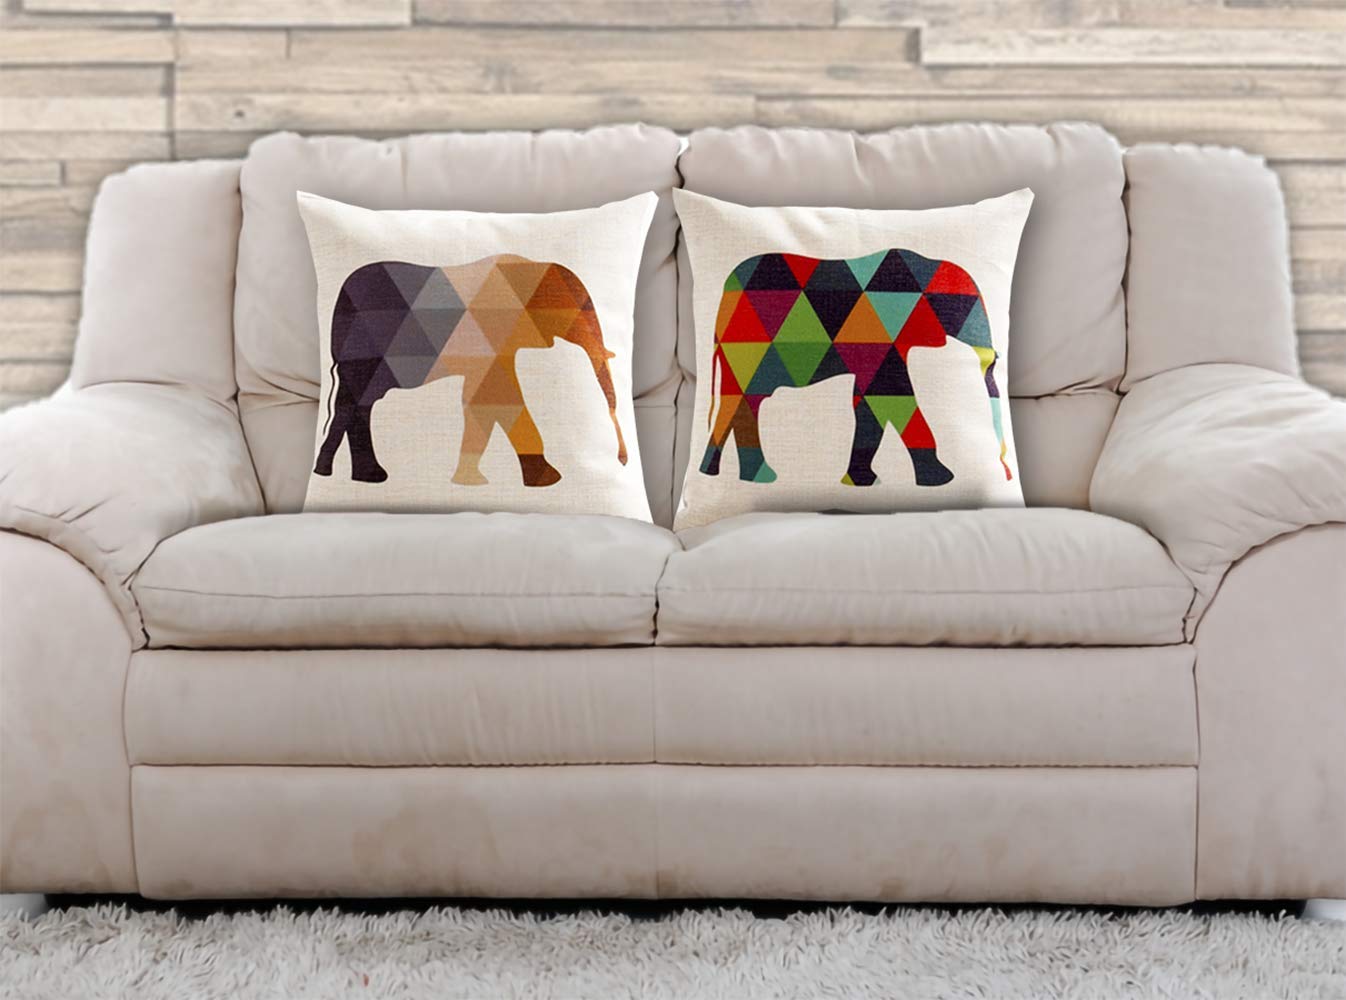 AAYU Elephant Decorative Throw Pillow Covers 18 x 18 Inch Set of 2 Linen Cushion Covers for Couch Sofa Bed Home Decor